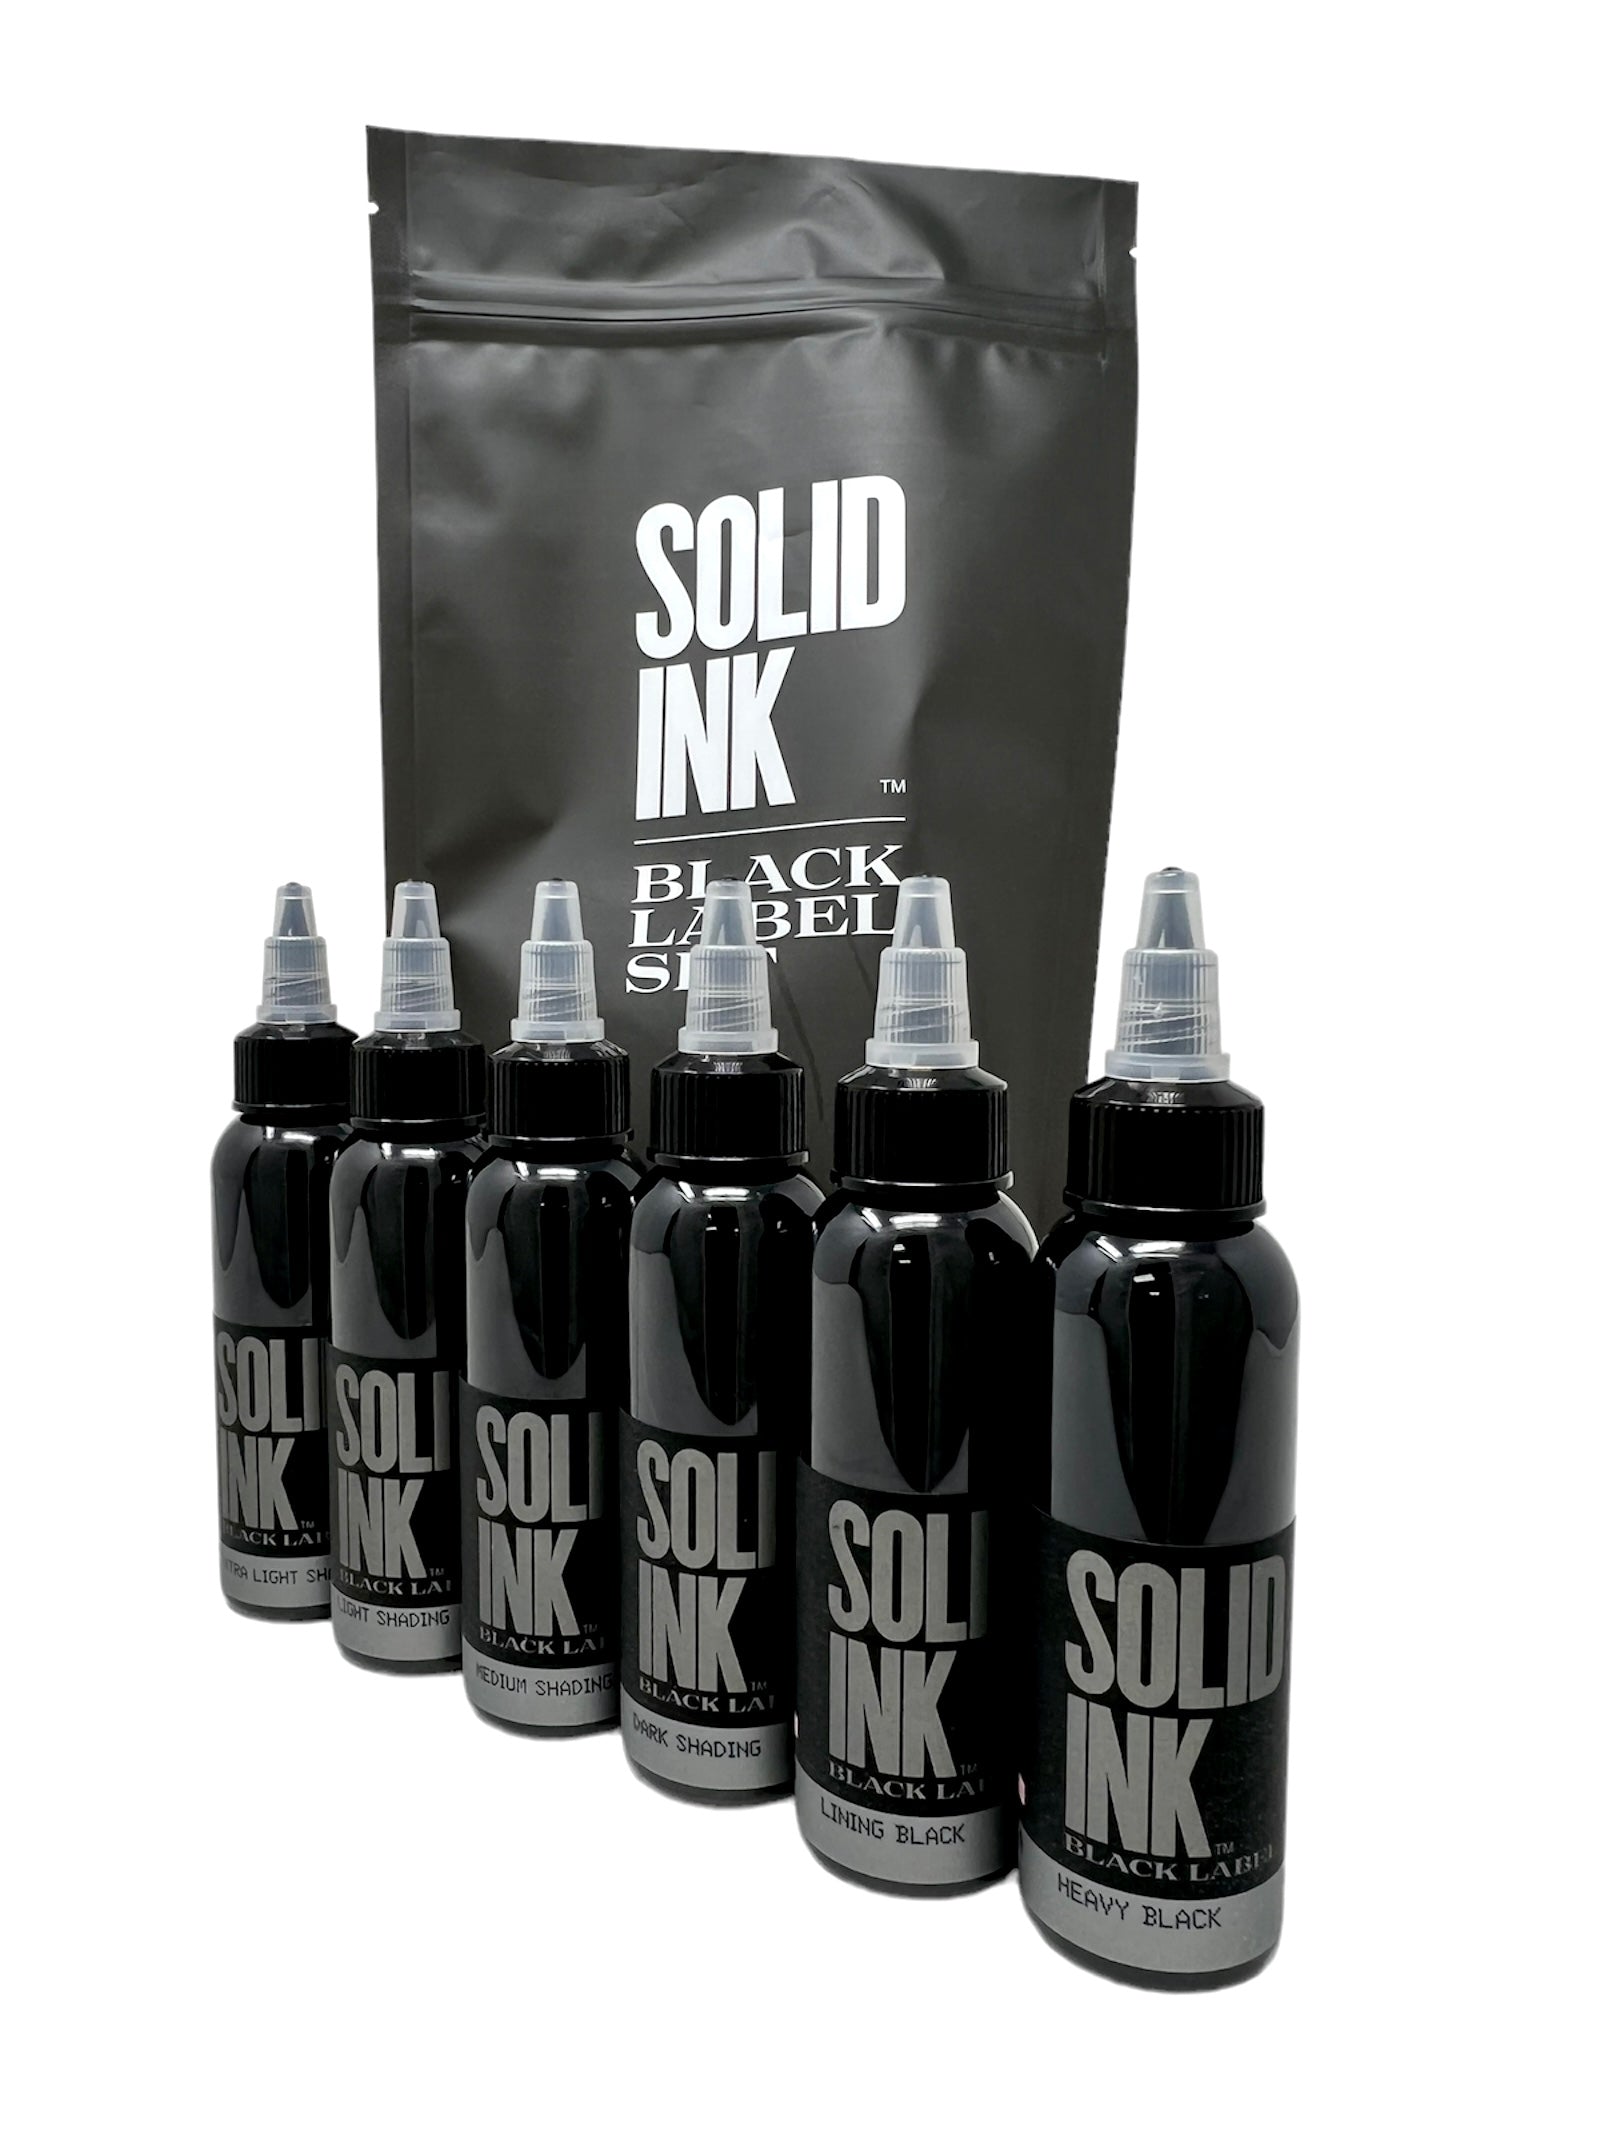 Solid 25 Color Tattoo Ink Set For Sale In-store & Online - Beacon